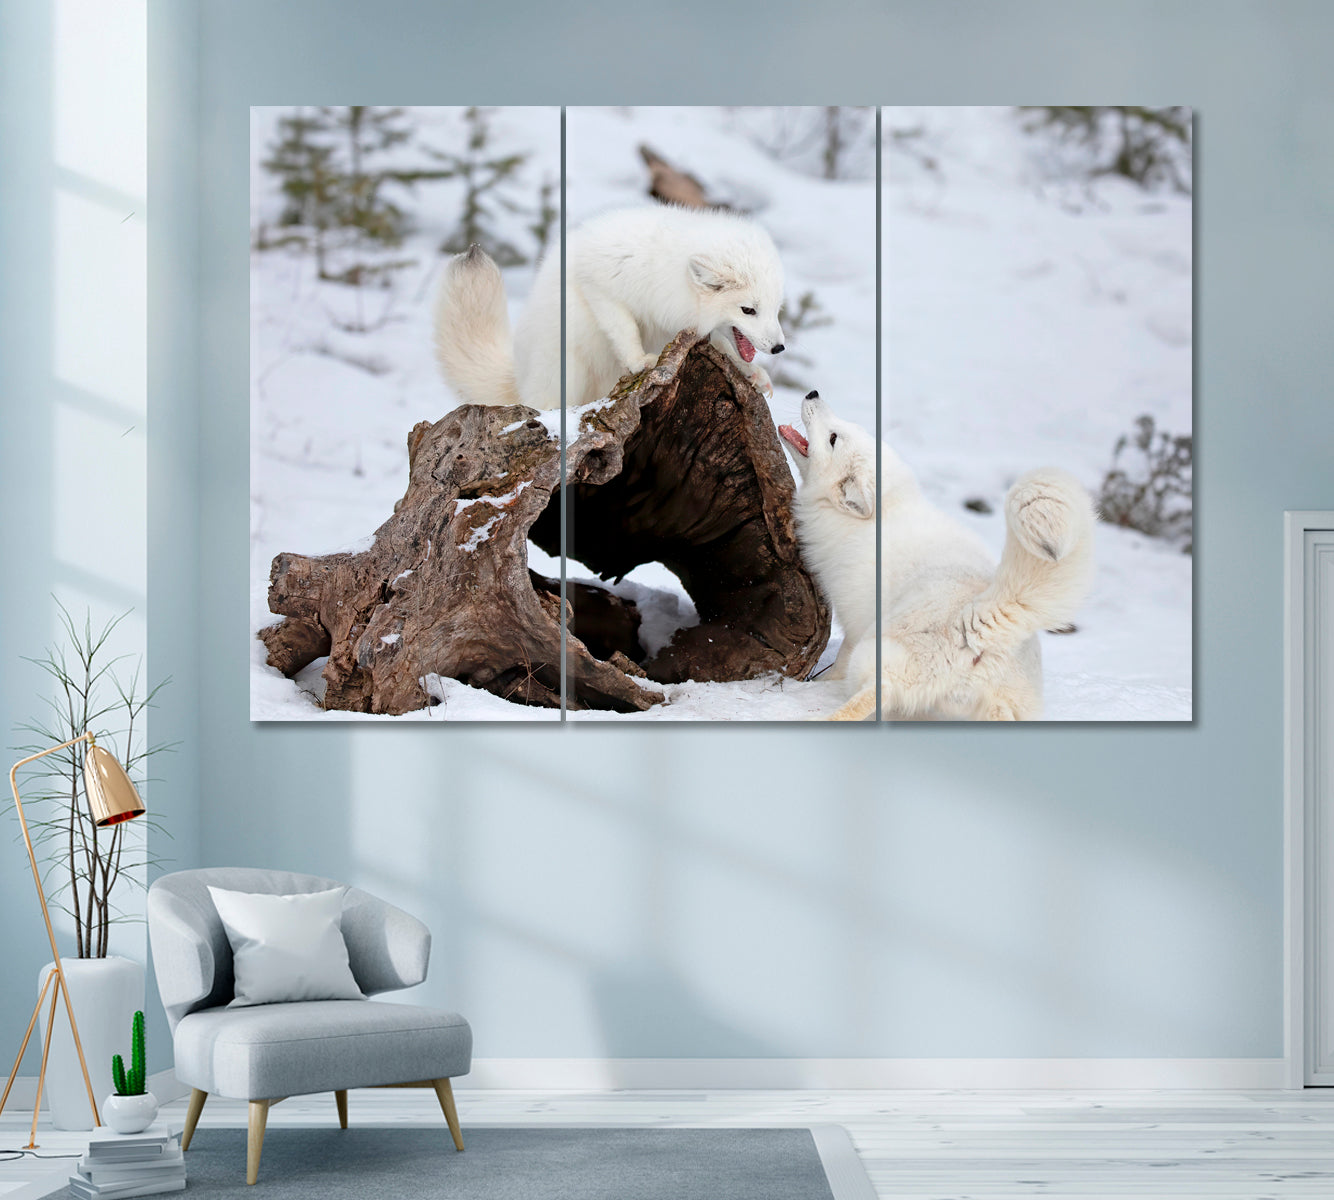 Two Arctic Fox Playing in Snow Montana USA Canvas Print ArtLexy 3 Panels 36"x24" inches 